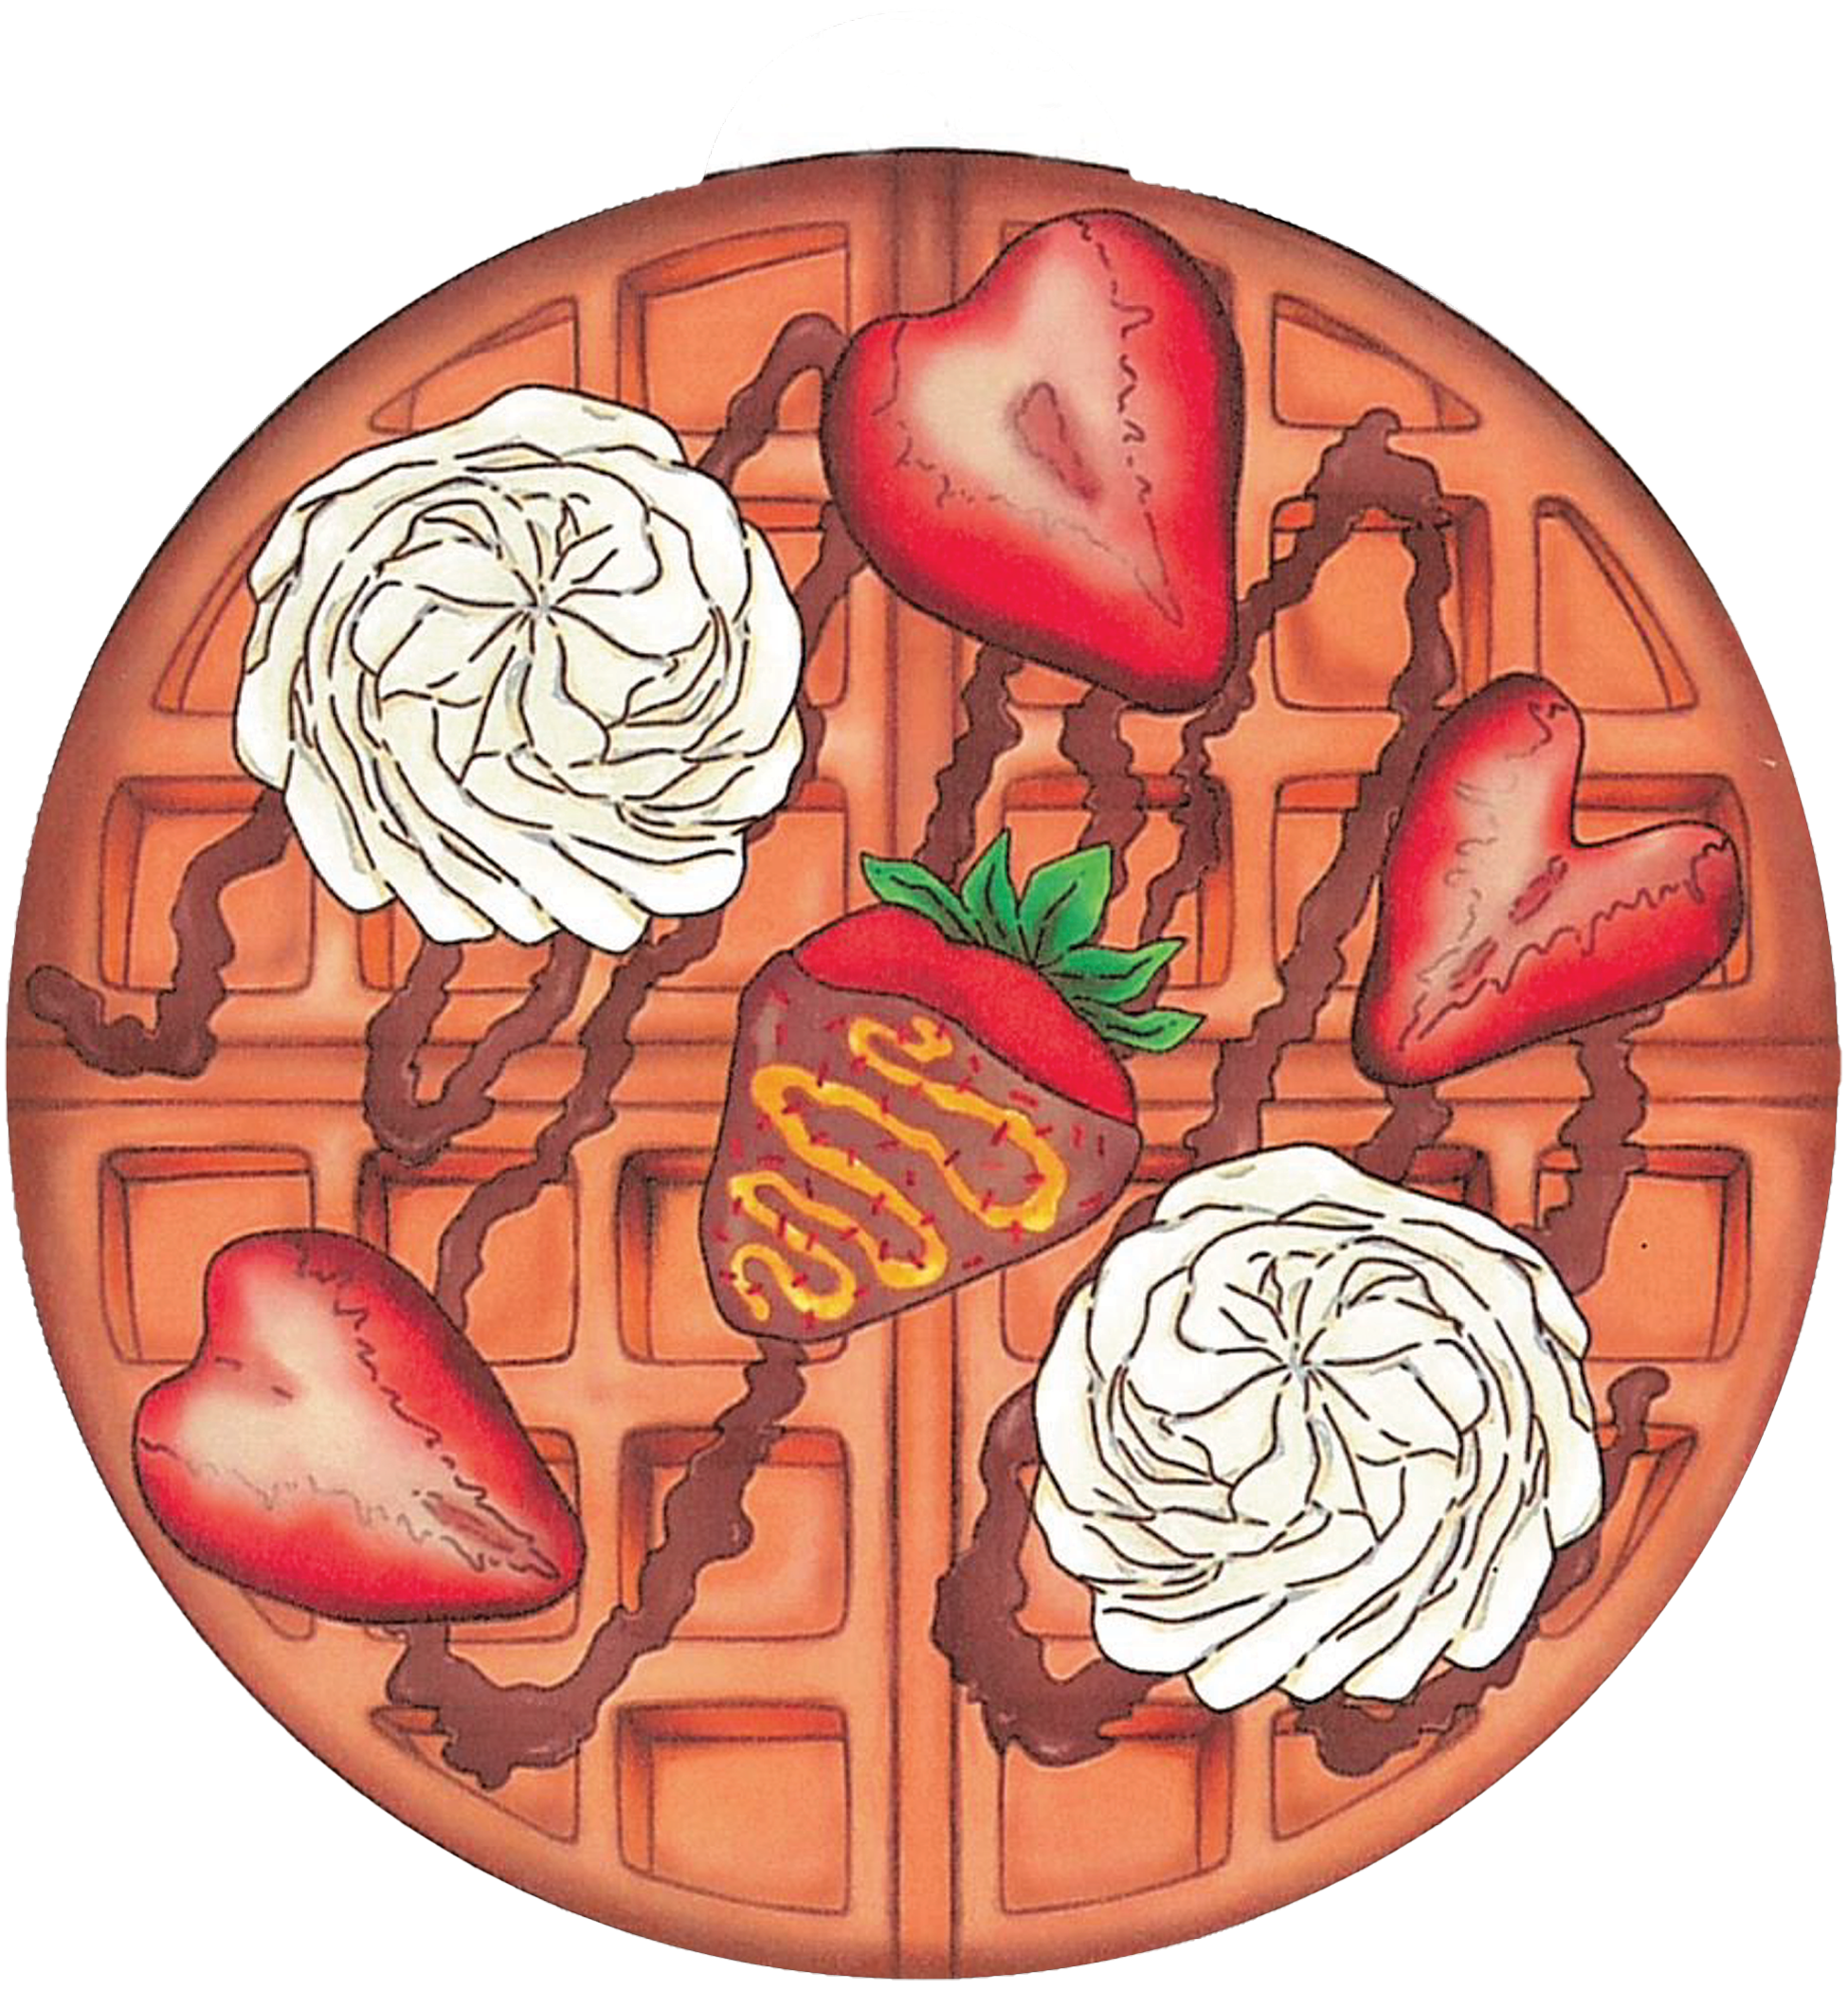 ornament depicting a Belgian waffle with strawberries and whipped cream